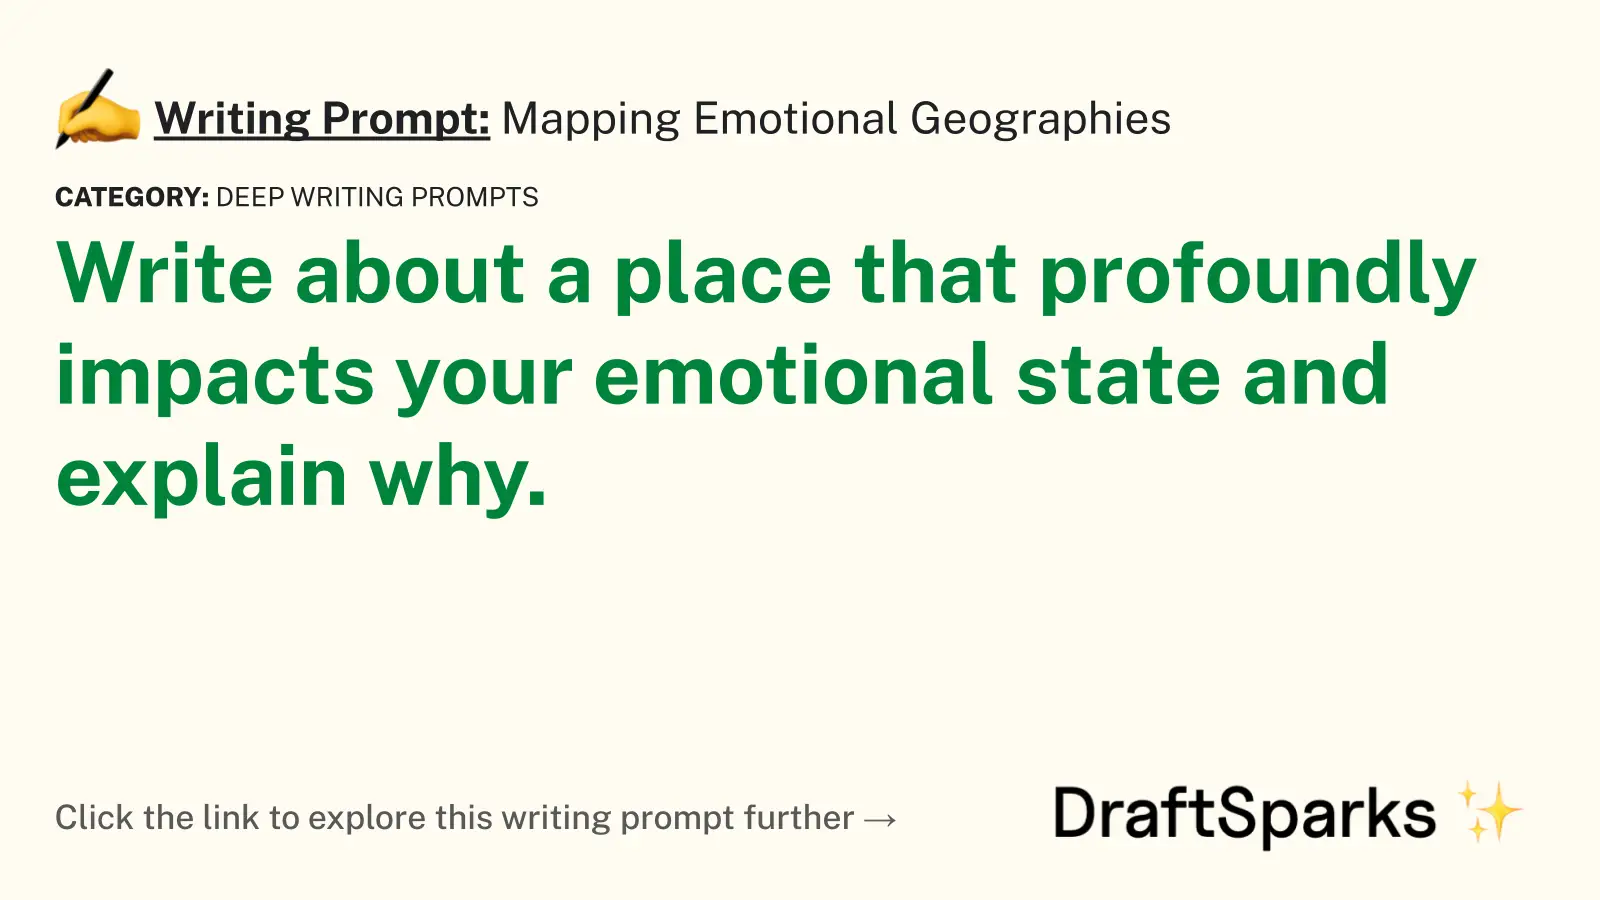 Mapping Emotional Geographies